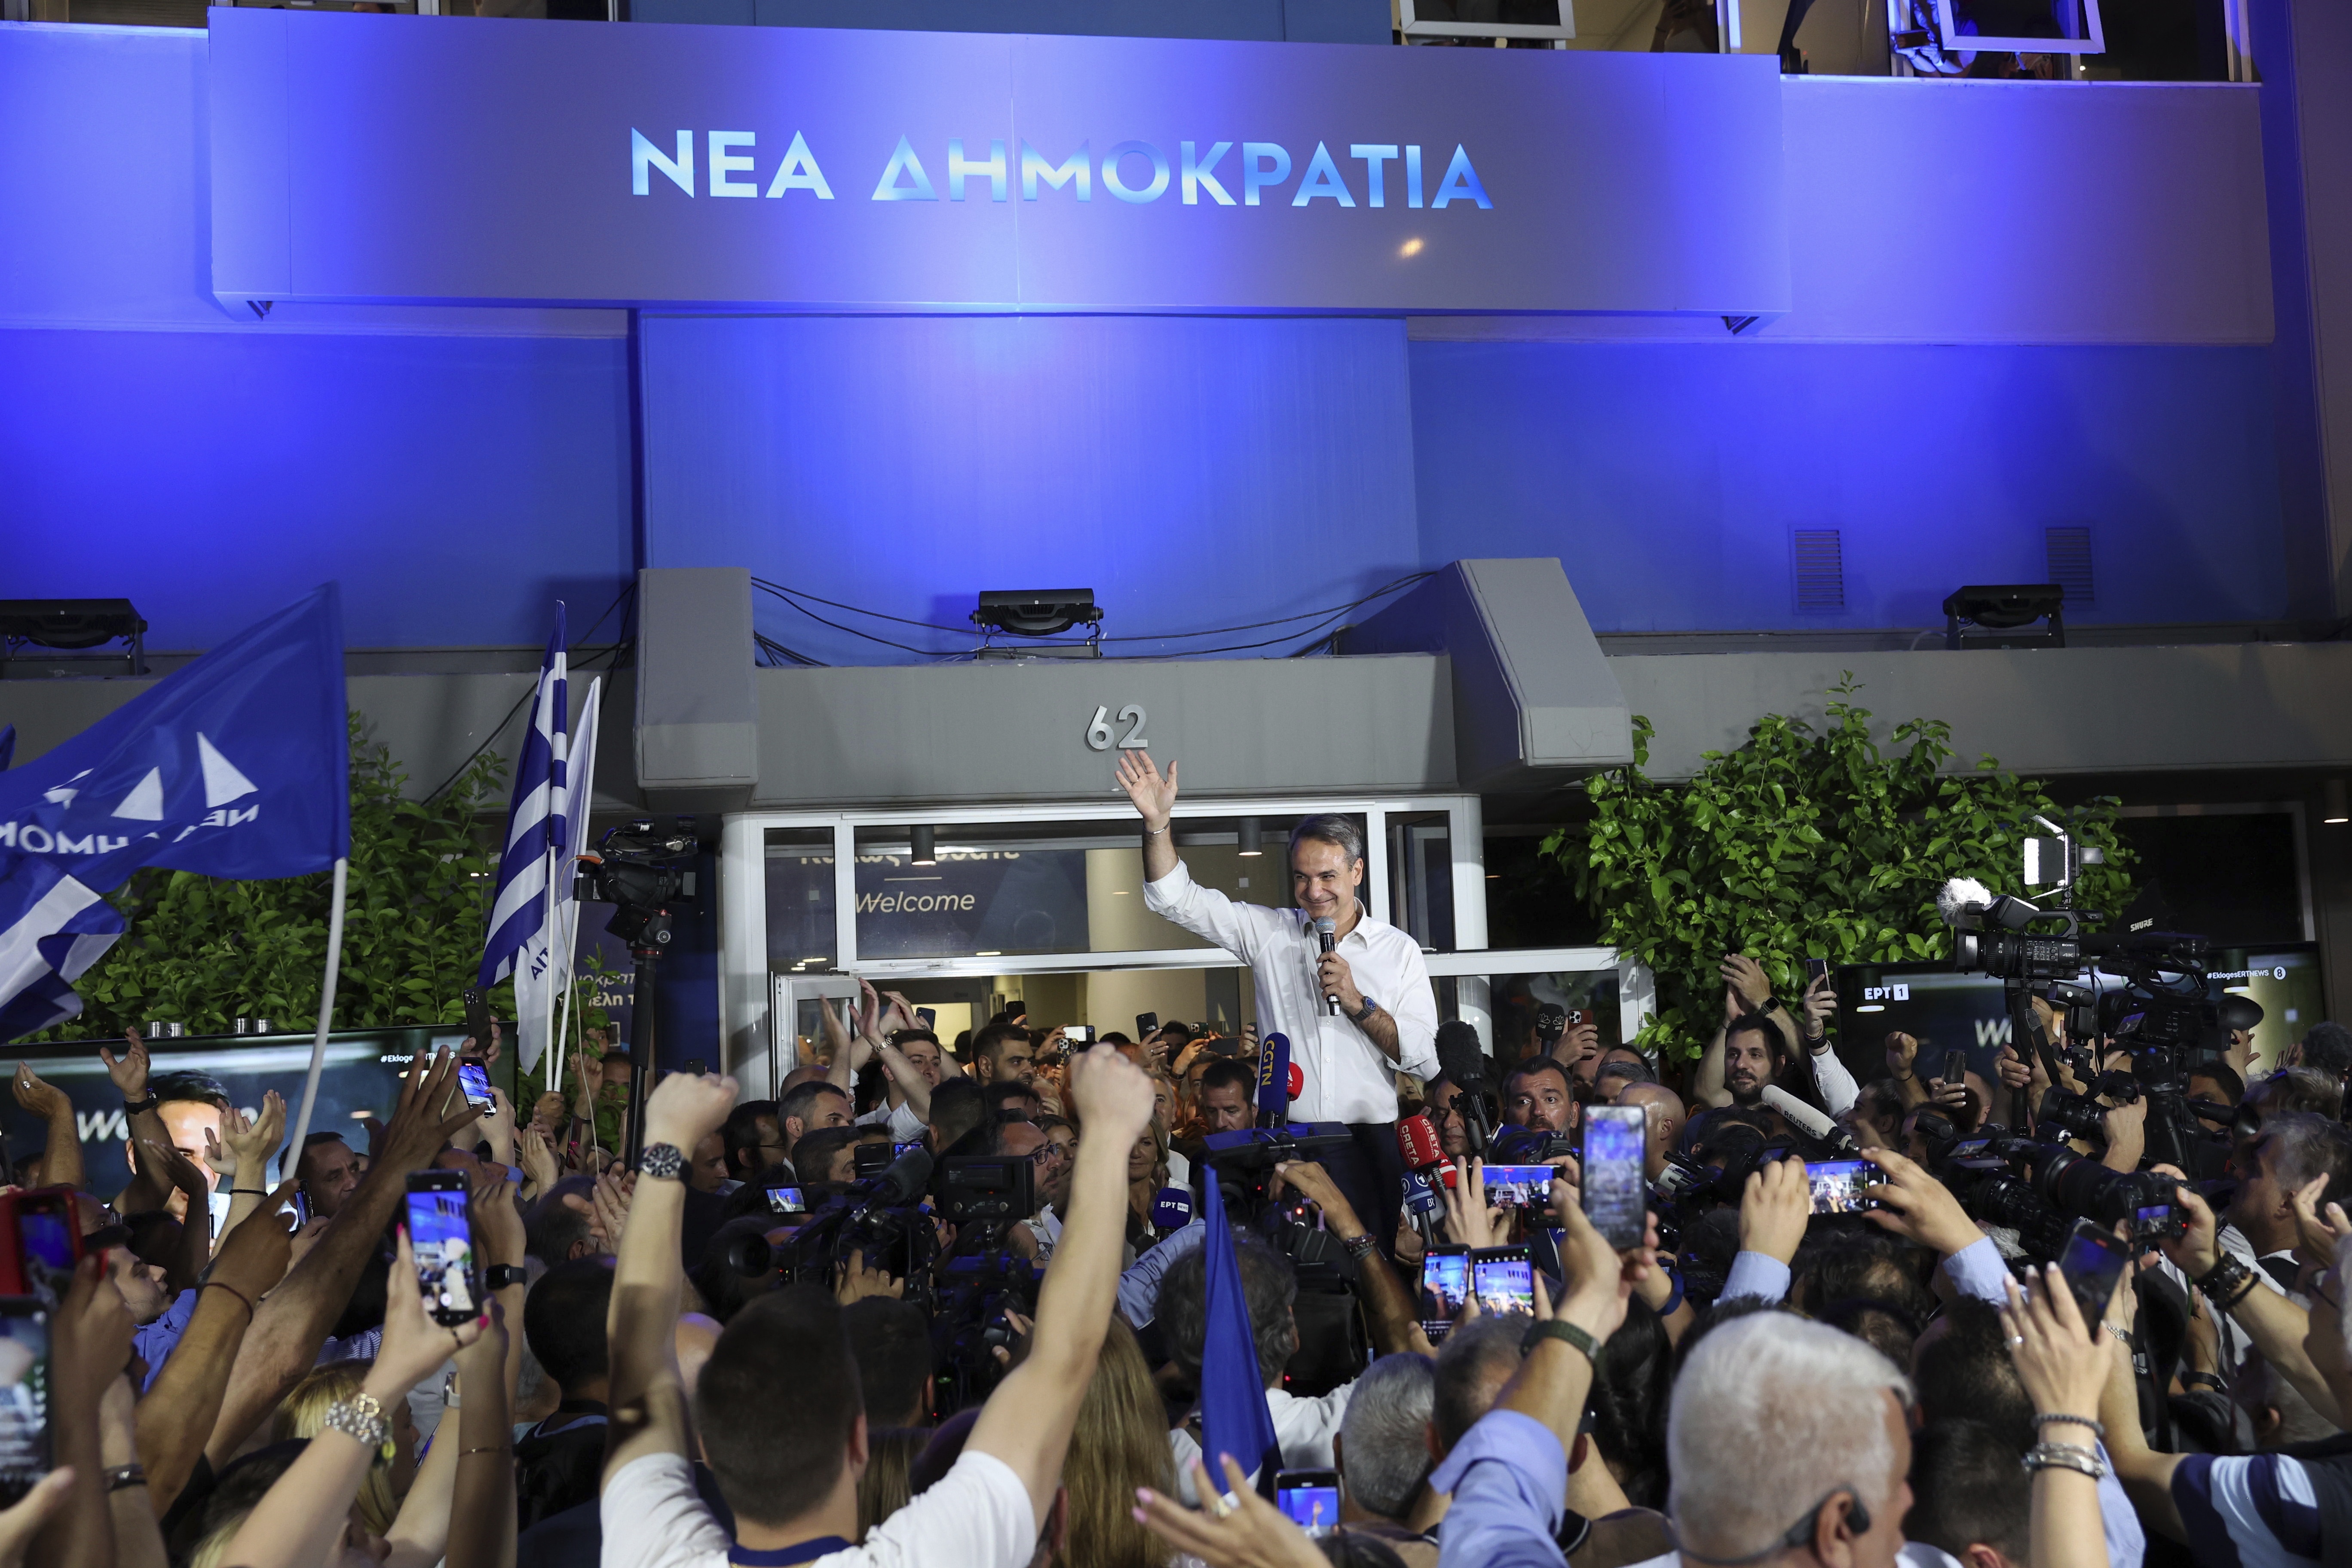 Kyriakos Mitsotakis leader of the center-right New Democracy waves to supporters outside the headquarters of the party in Athens, Greece, Sunday, June 25, 2023. Greece's conservative New Democracy party has won a landslide victory in the country's second election in five weeks, with partial official results showing it gaining a comfortable parliamentary majority to form a government for a second four-year term. (AP Photo/Yorgos Karahalis)

Associated Press/LaPresse
Only Italy and Spain